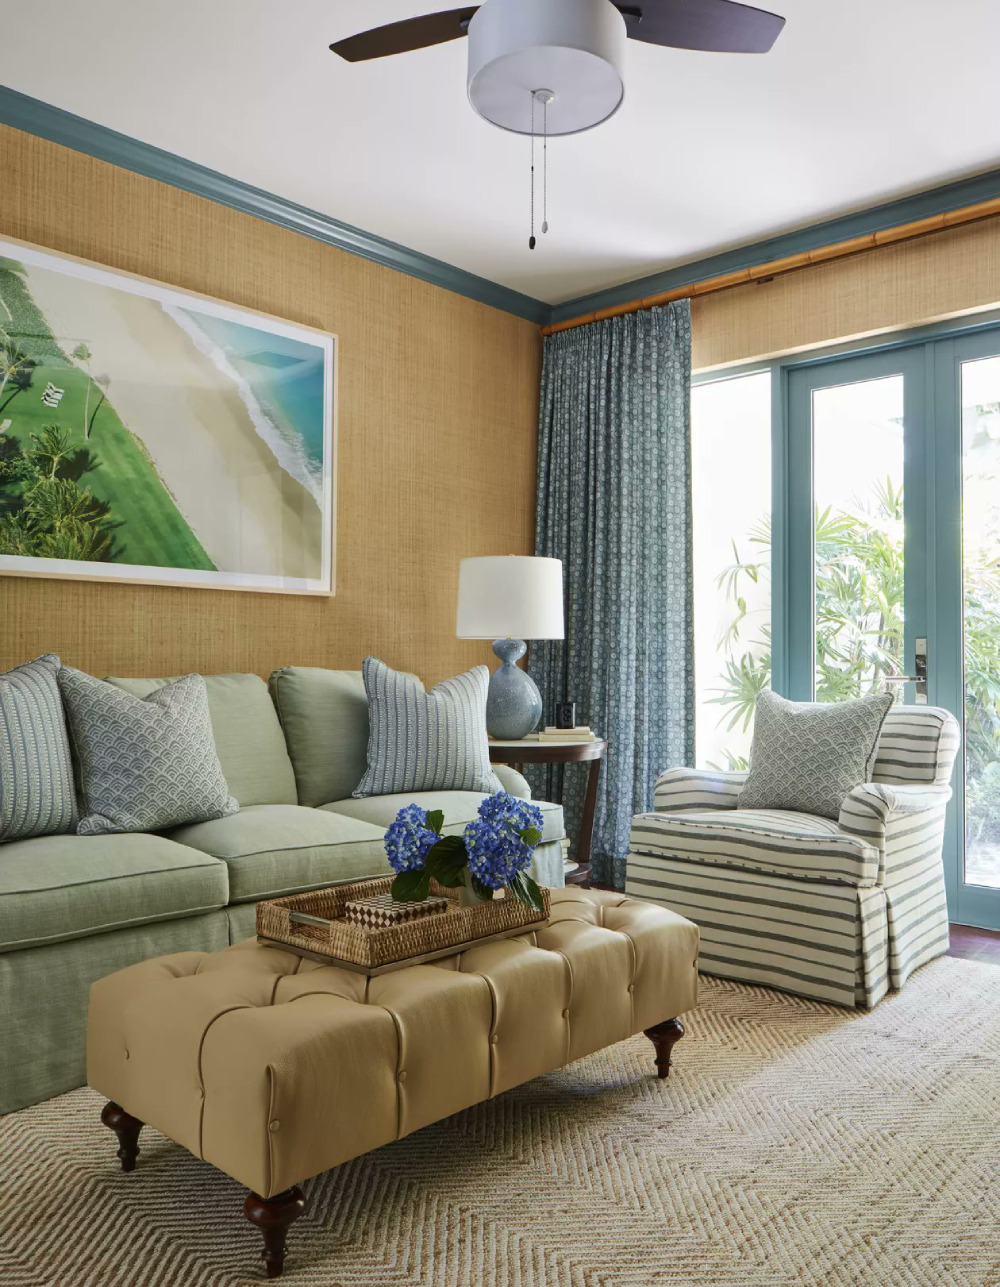 1-47-6 Colors That Go With Olive Green When Decorating a Room